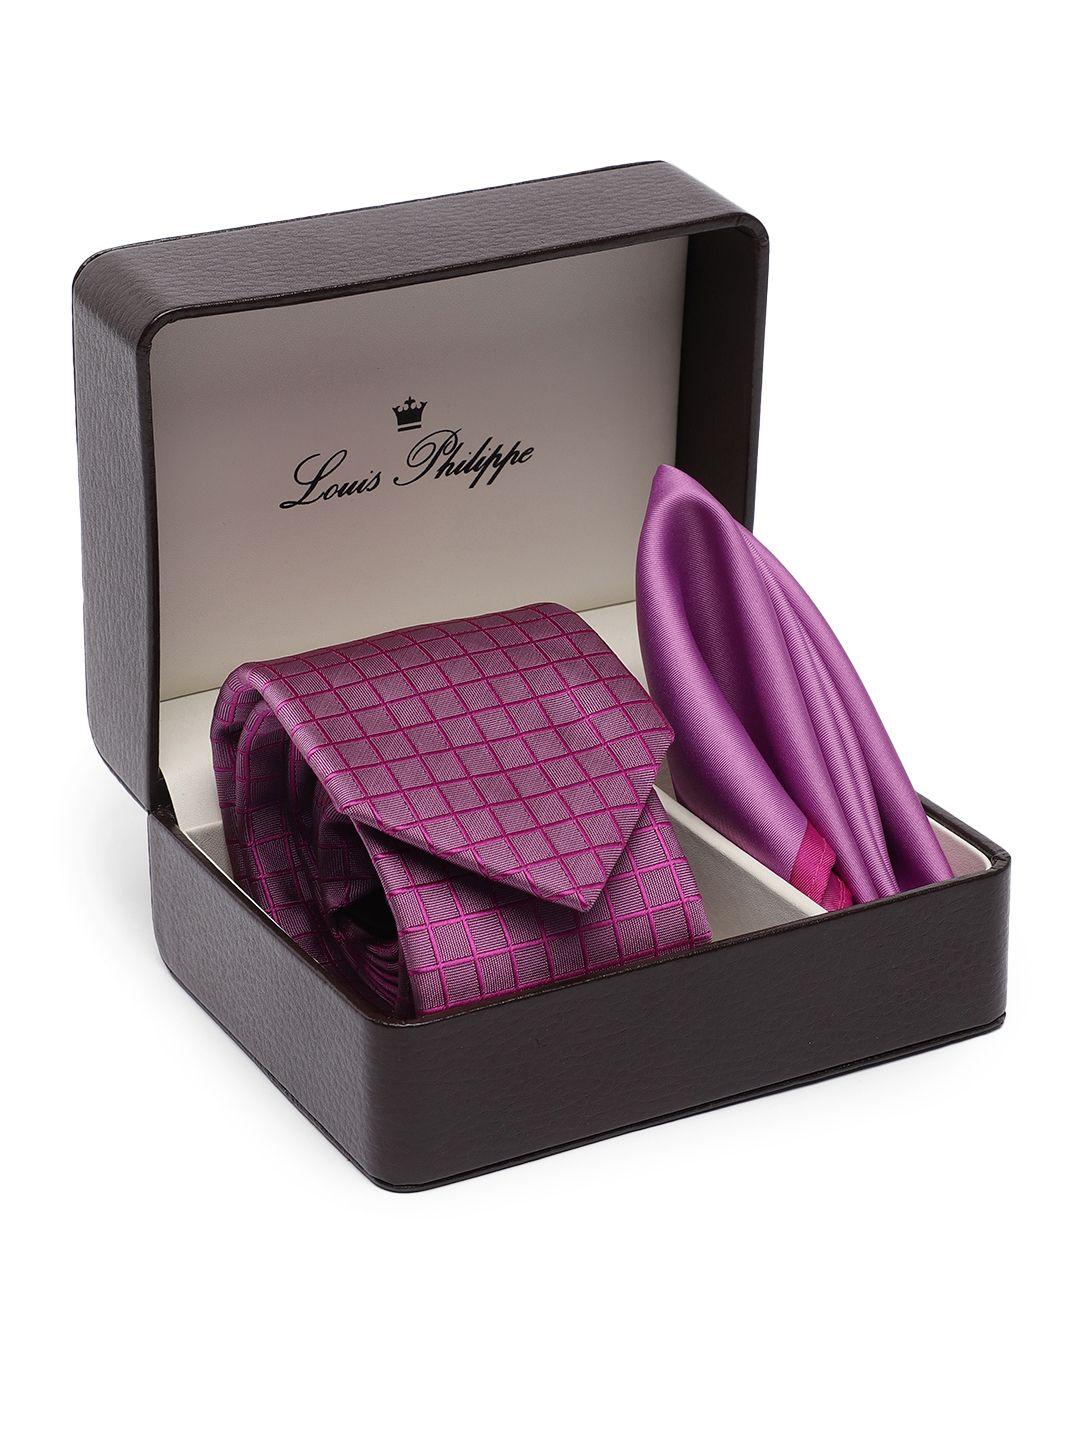 louis philippe men patterned accessory gift set